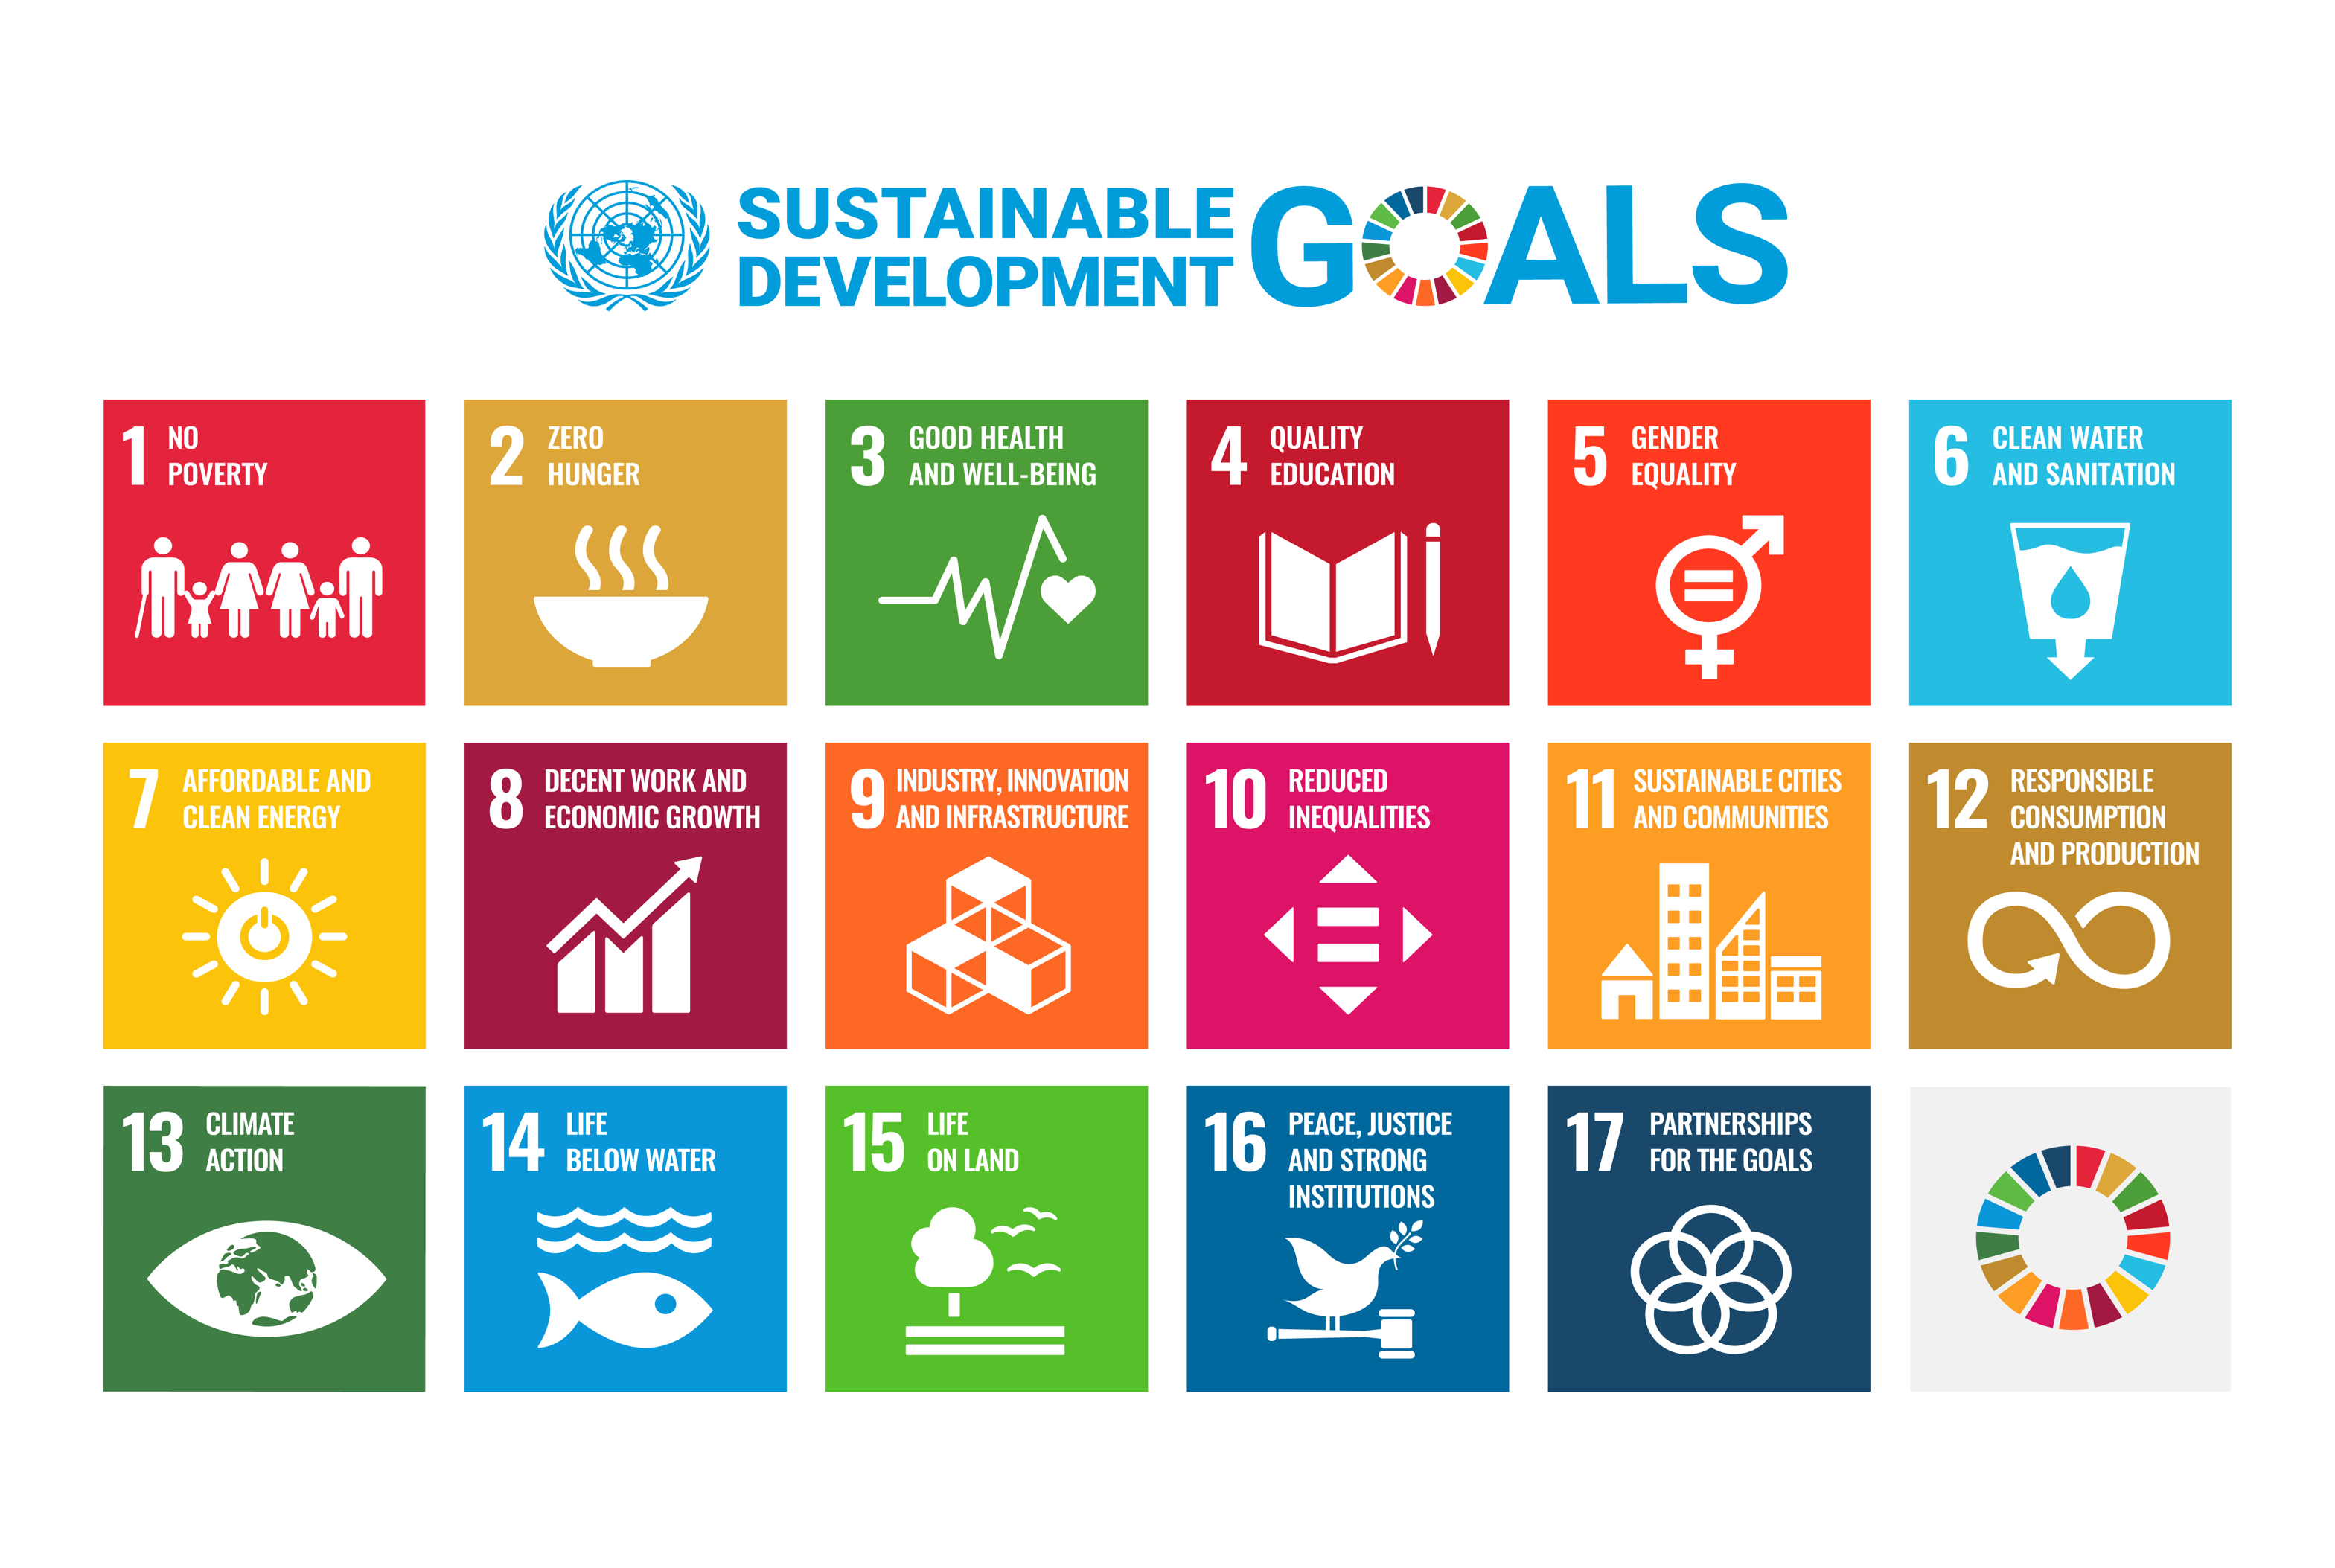 The United Nations Sustainable Development Goals together